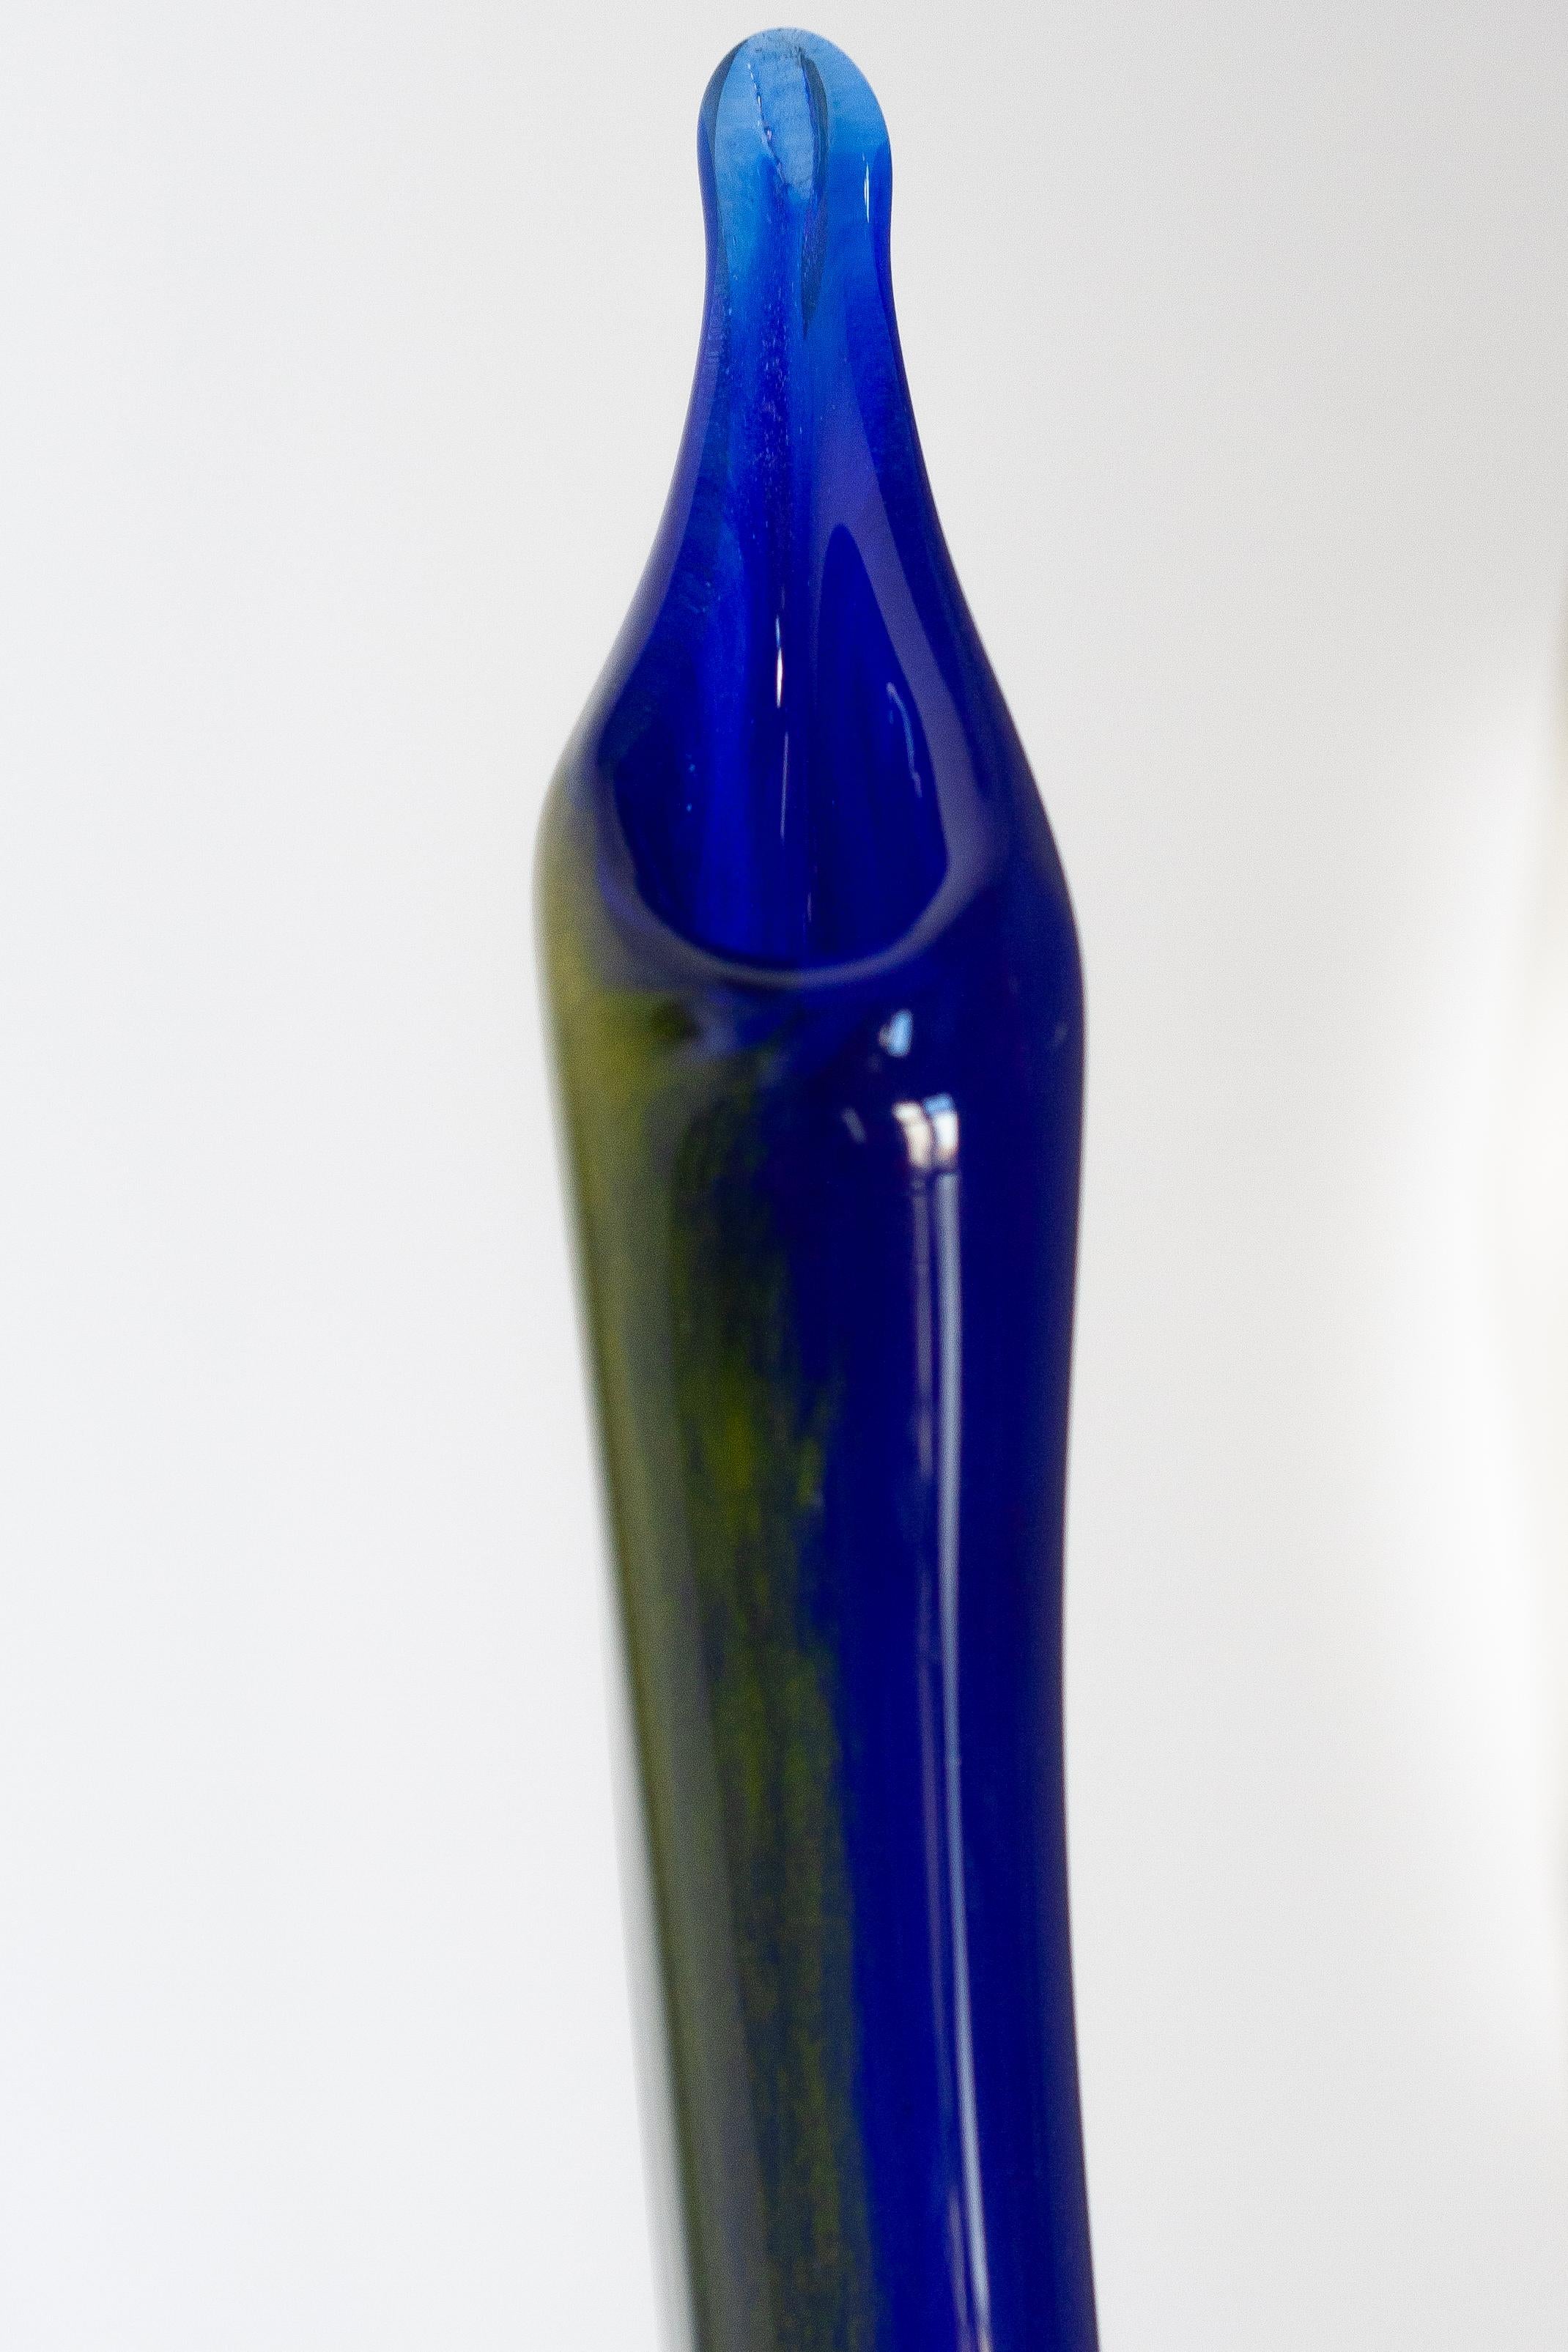 Mid Century Ultramarine Blue and Yellow Artistic Vase, Europe, 1960s For Sale 6